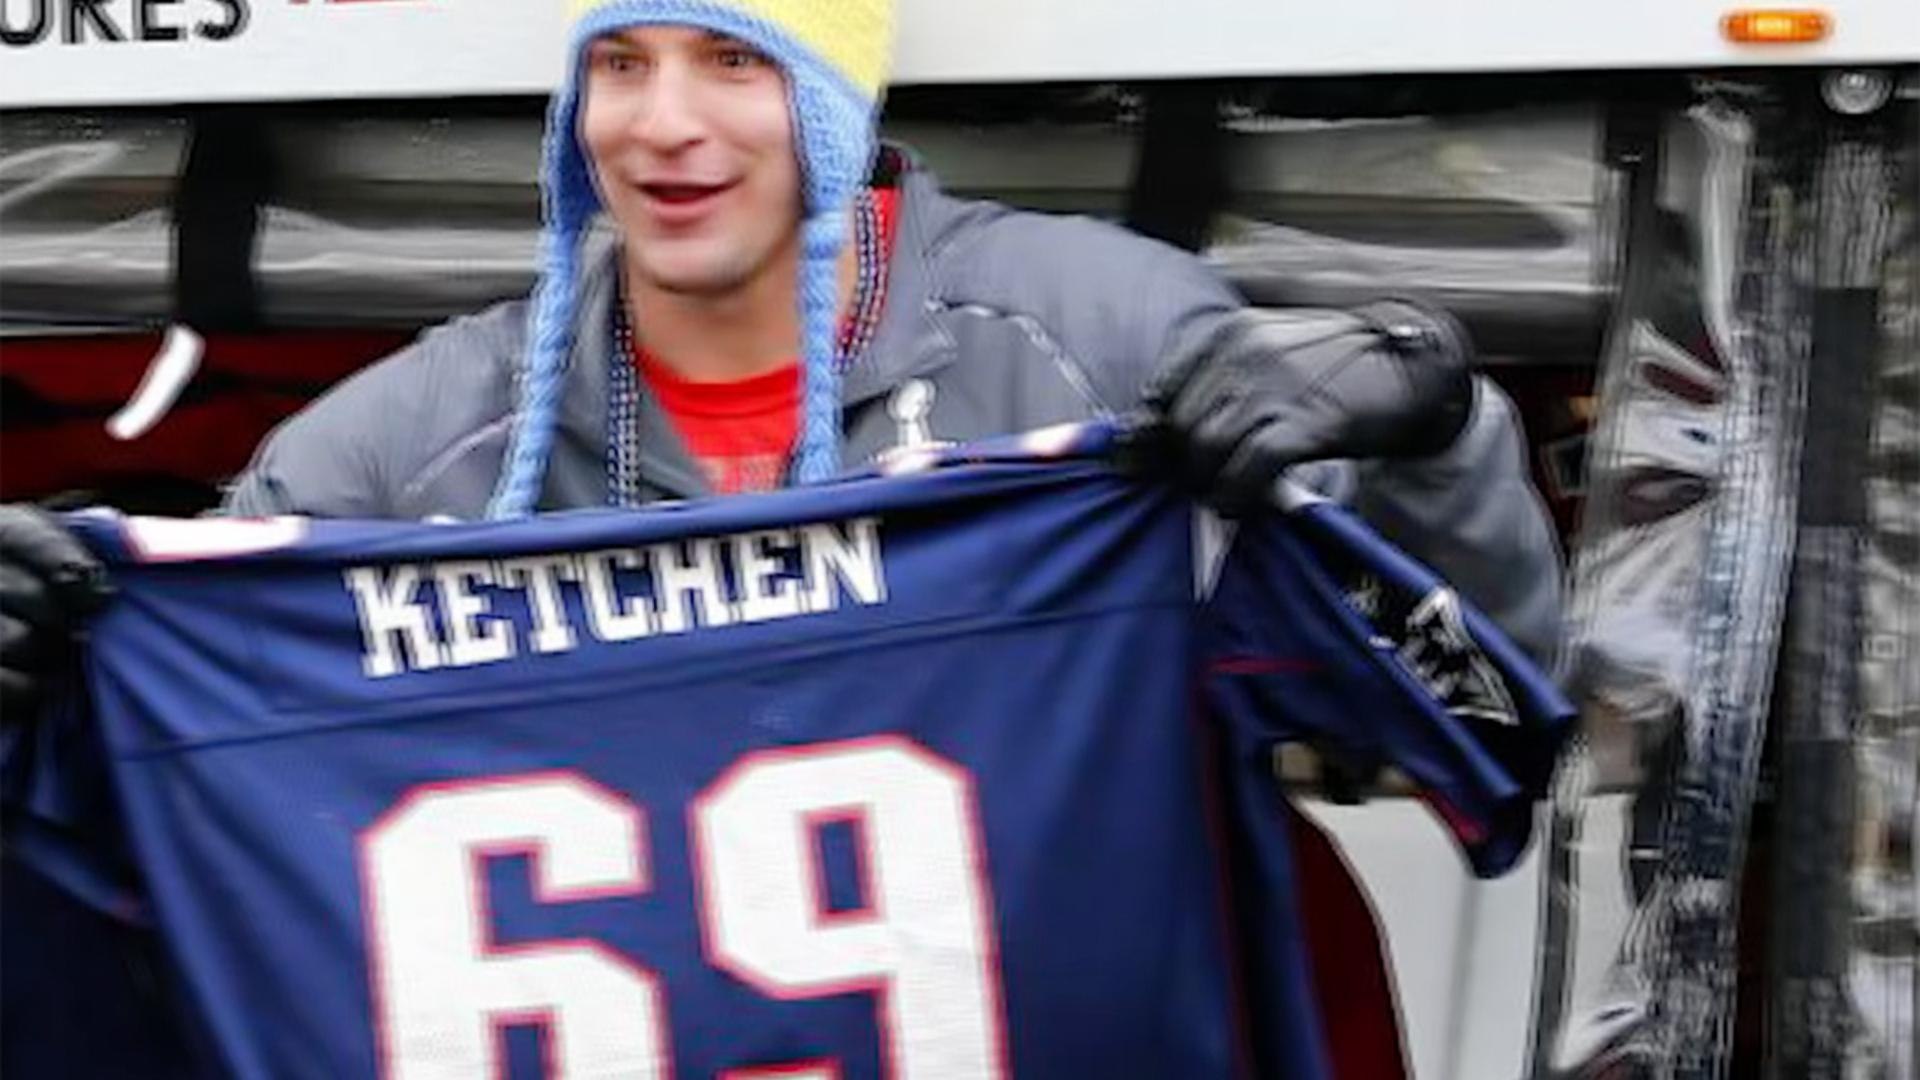 gronk 69 jersey